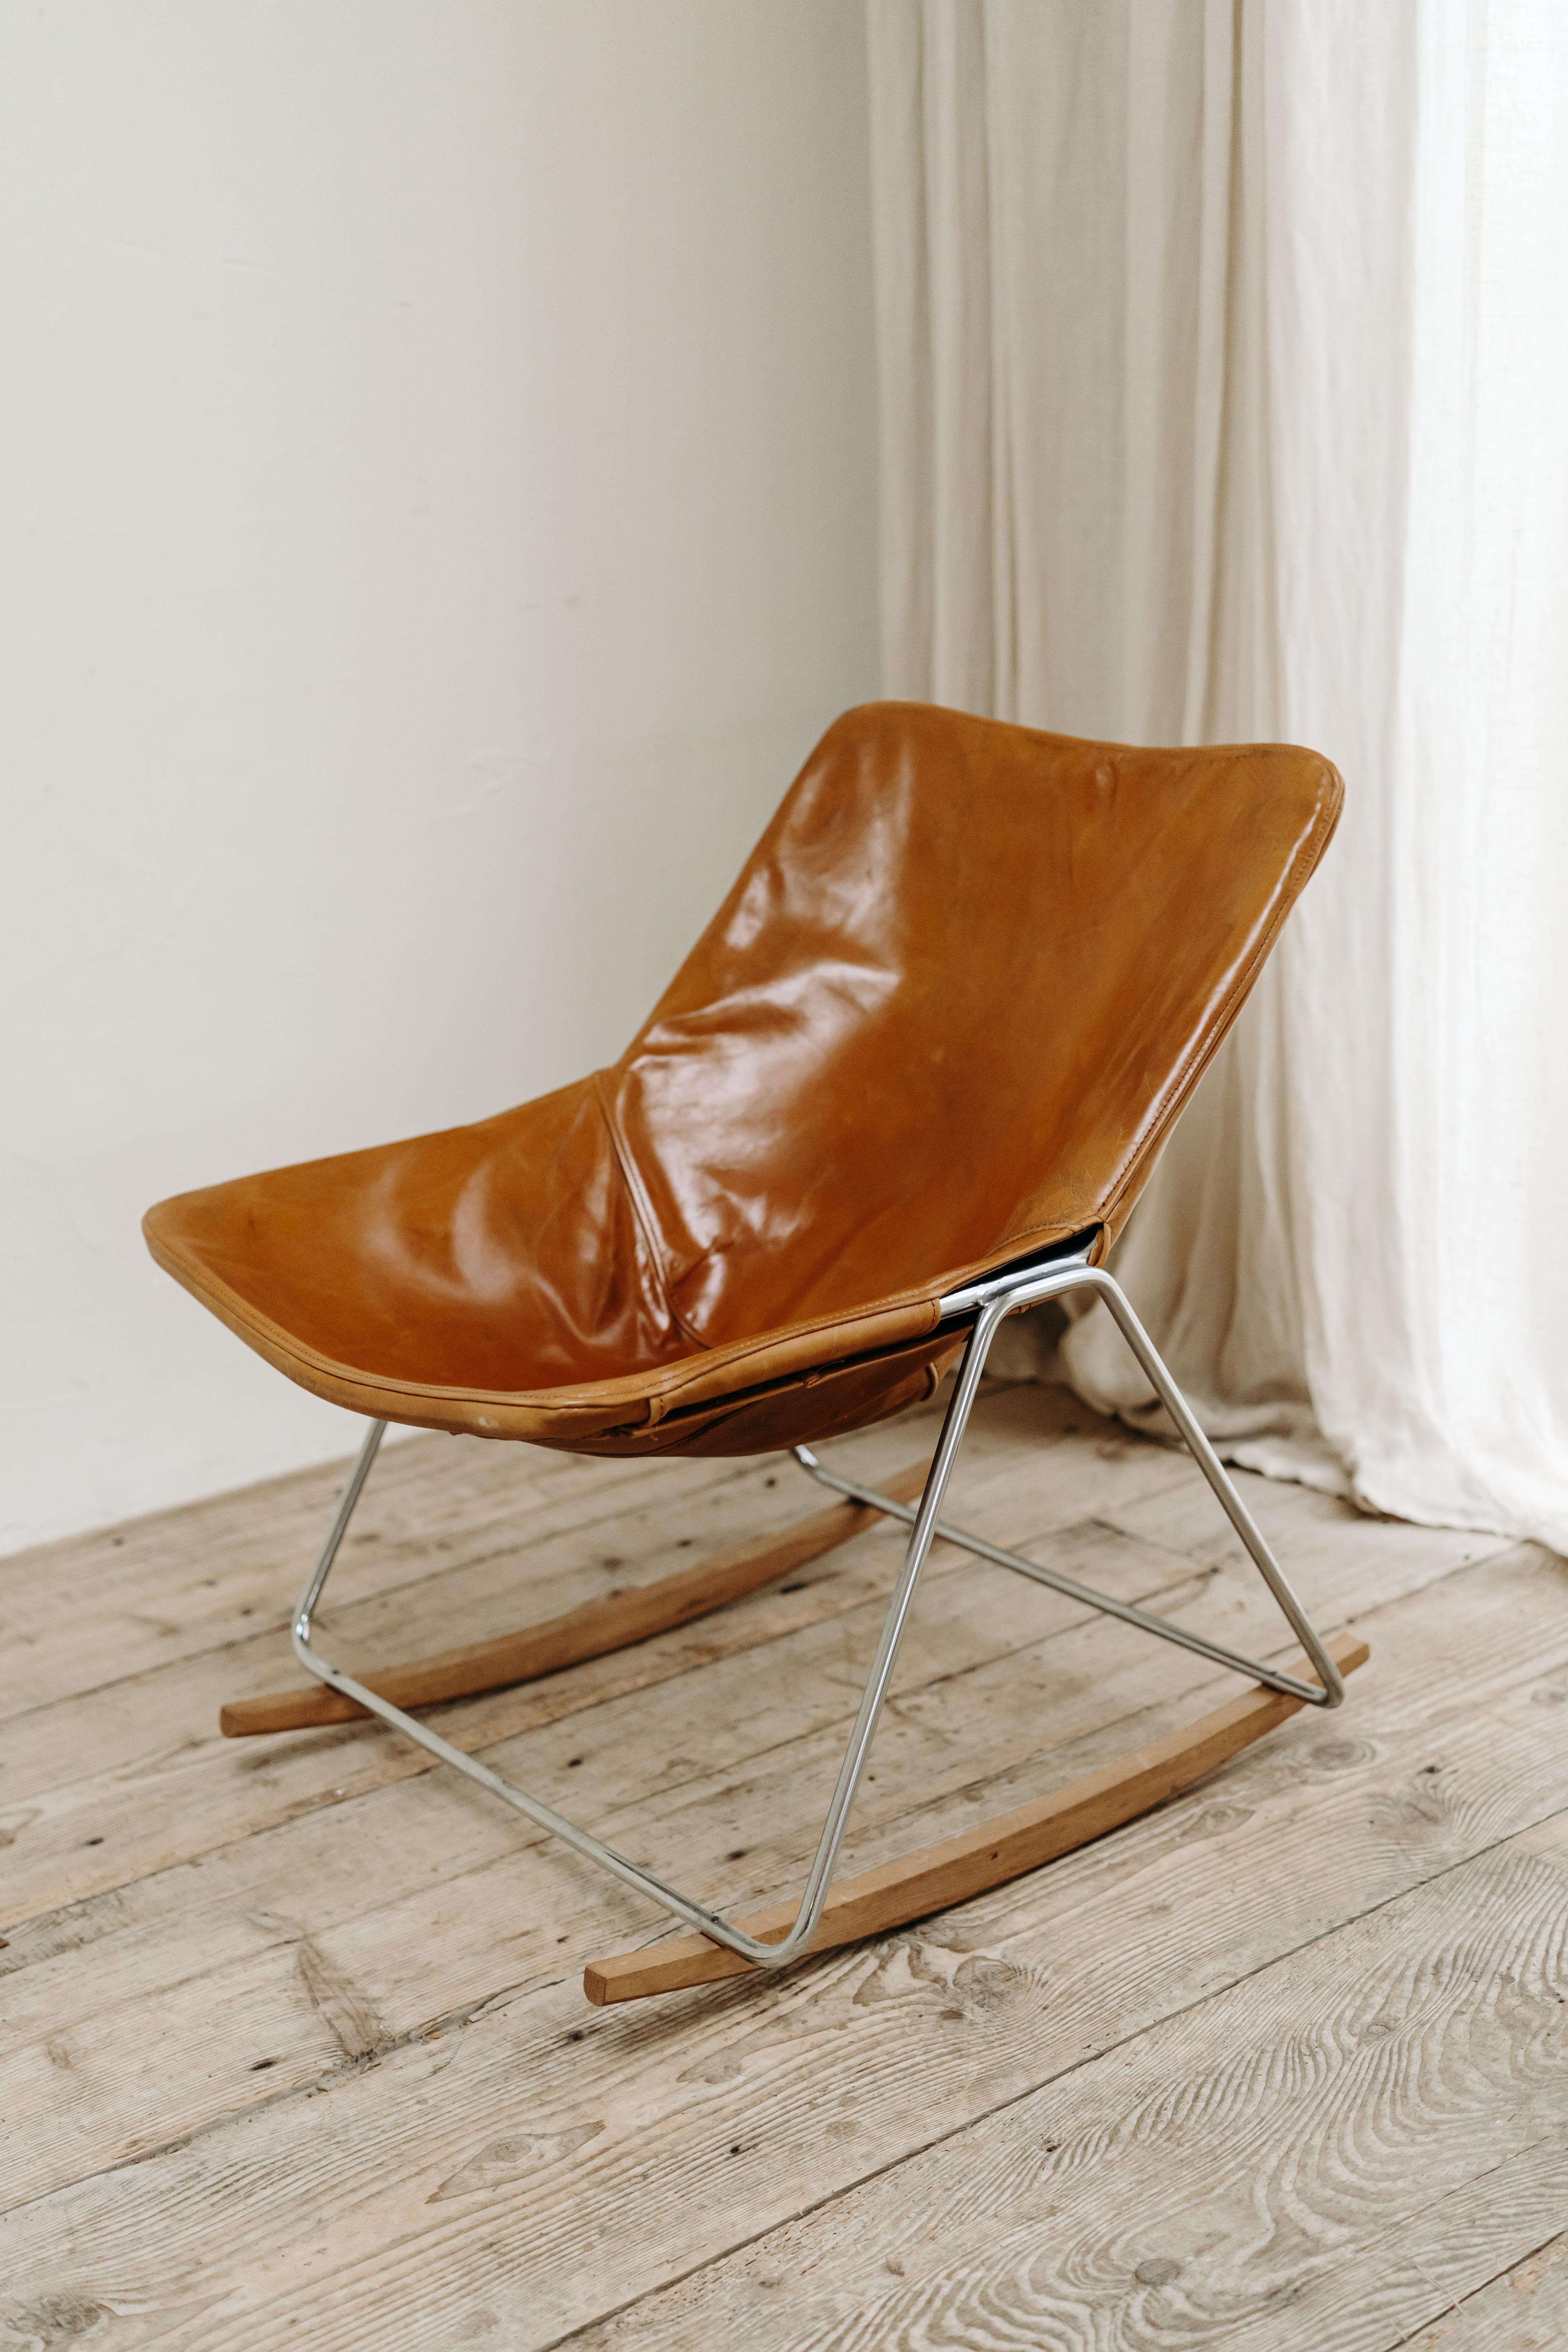 Steel Leather G1 Rocking Chair by Pierre Guariche for Airborne, France